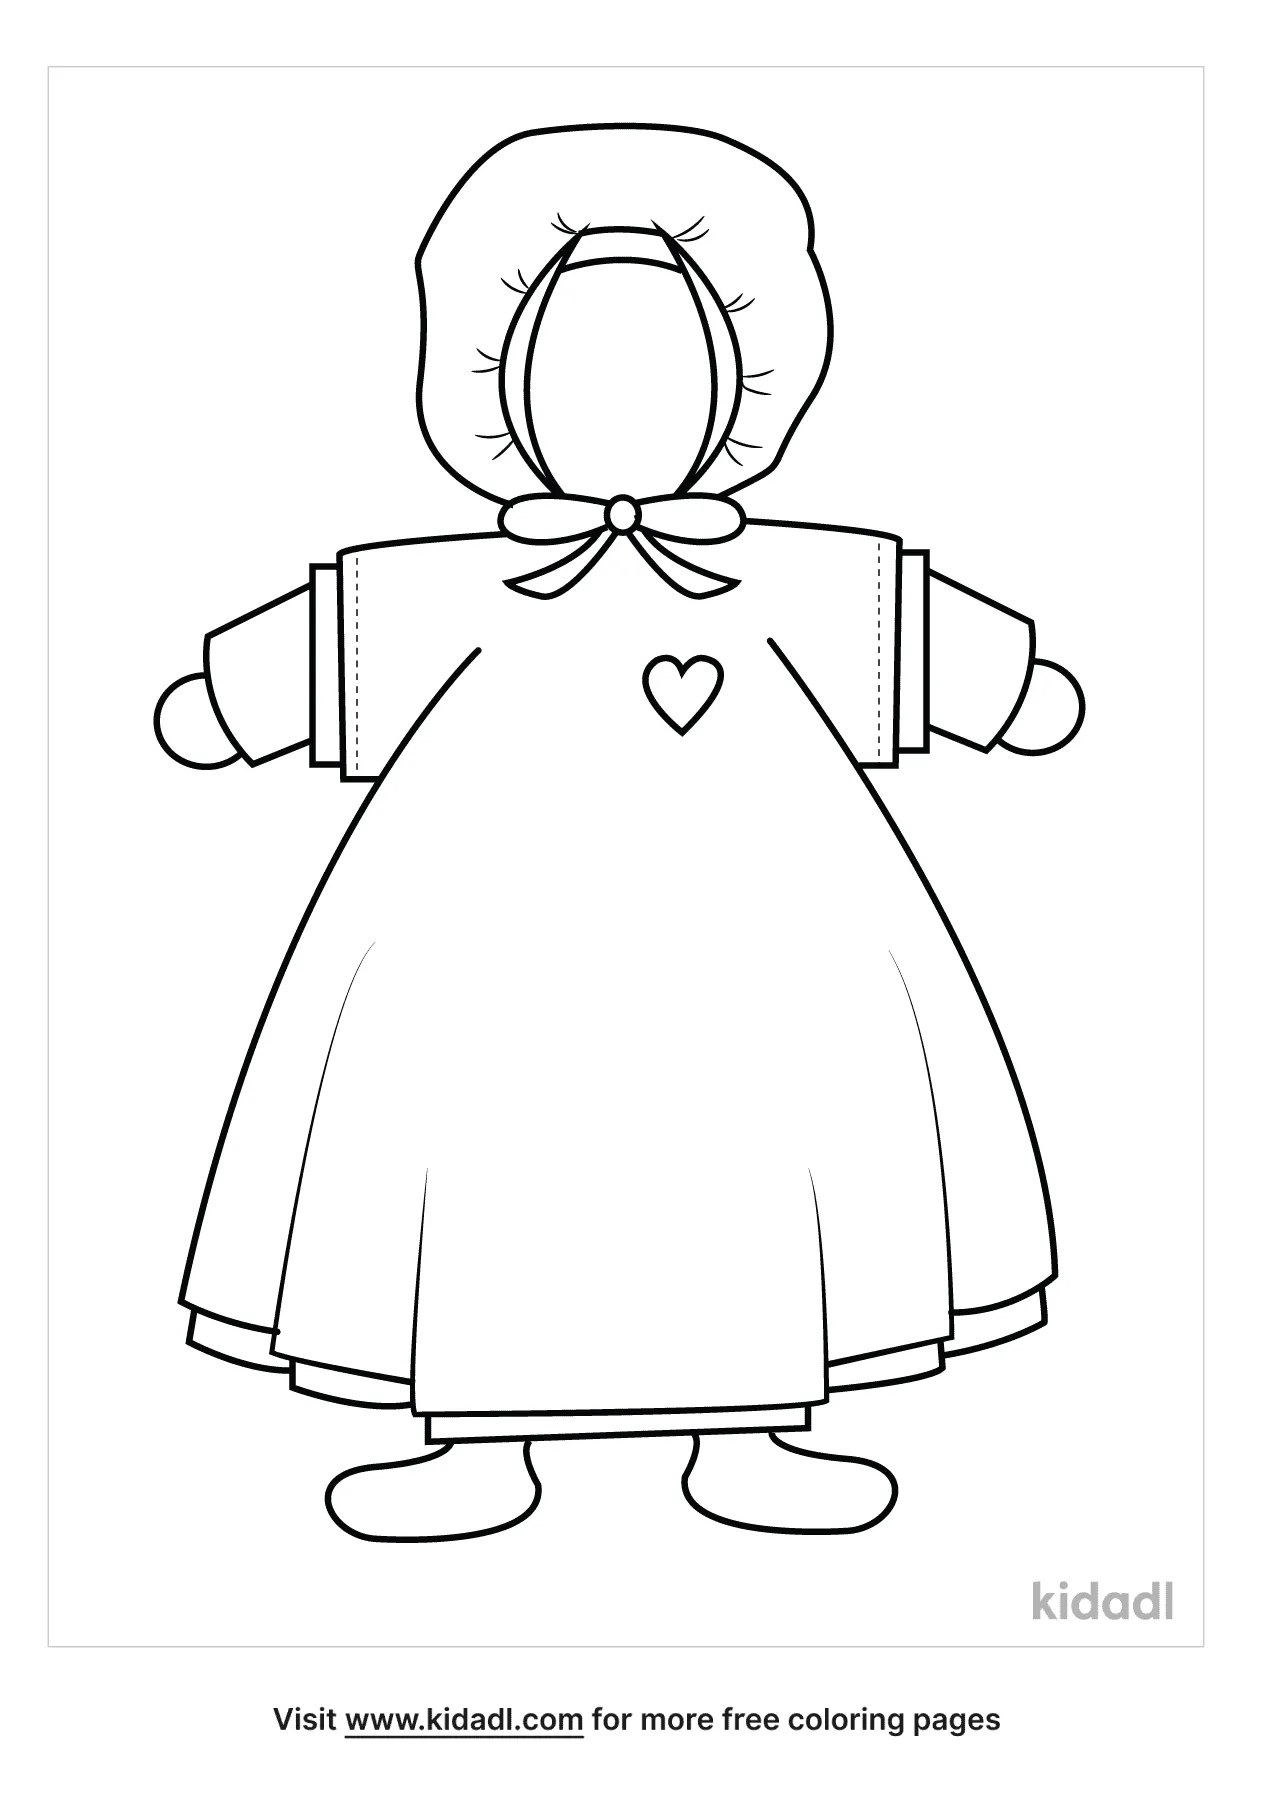 Free Amish Doll Coloring Page | Coloring Page Printables | Kidadl